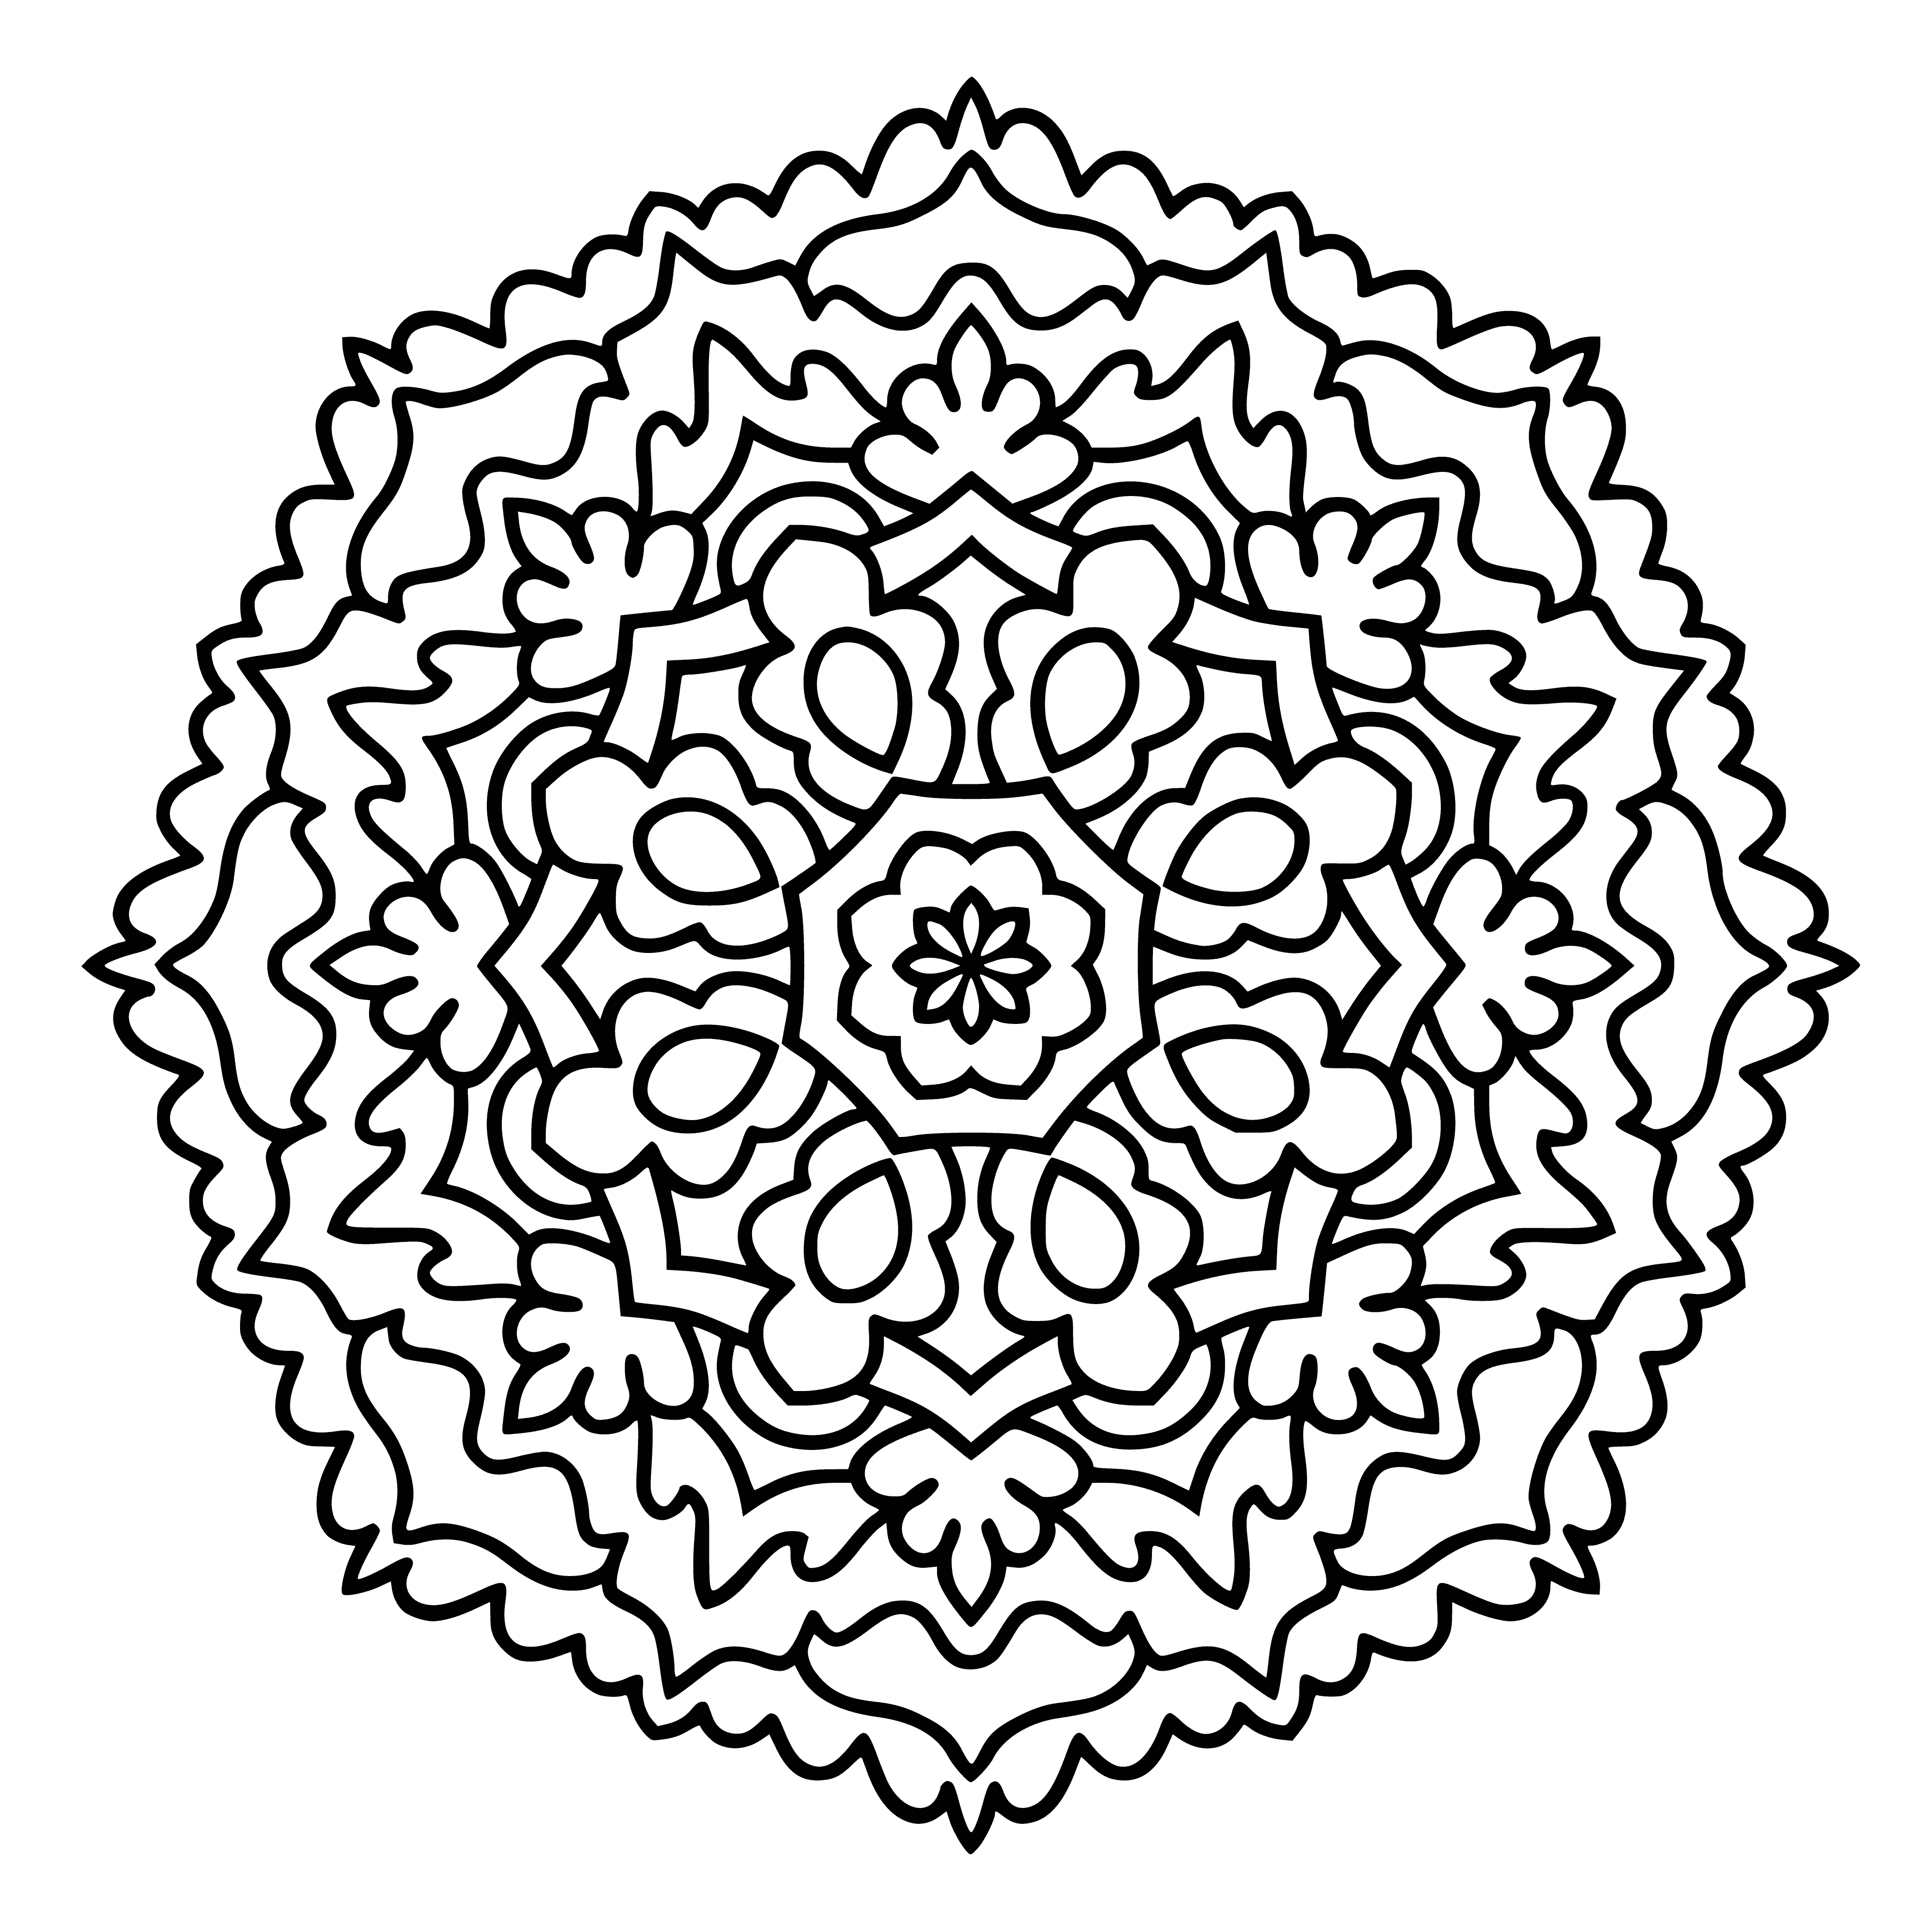 coloring page: Detailed, intricate mandala coloring pages to relax & unwind. Circular shape filled with swirls and loops. Lots of spaces to color & de-stress.